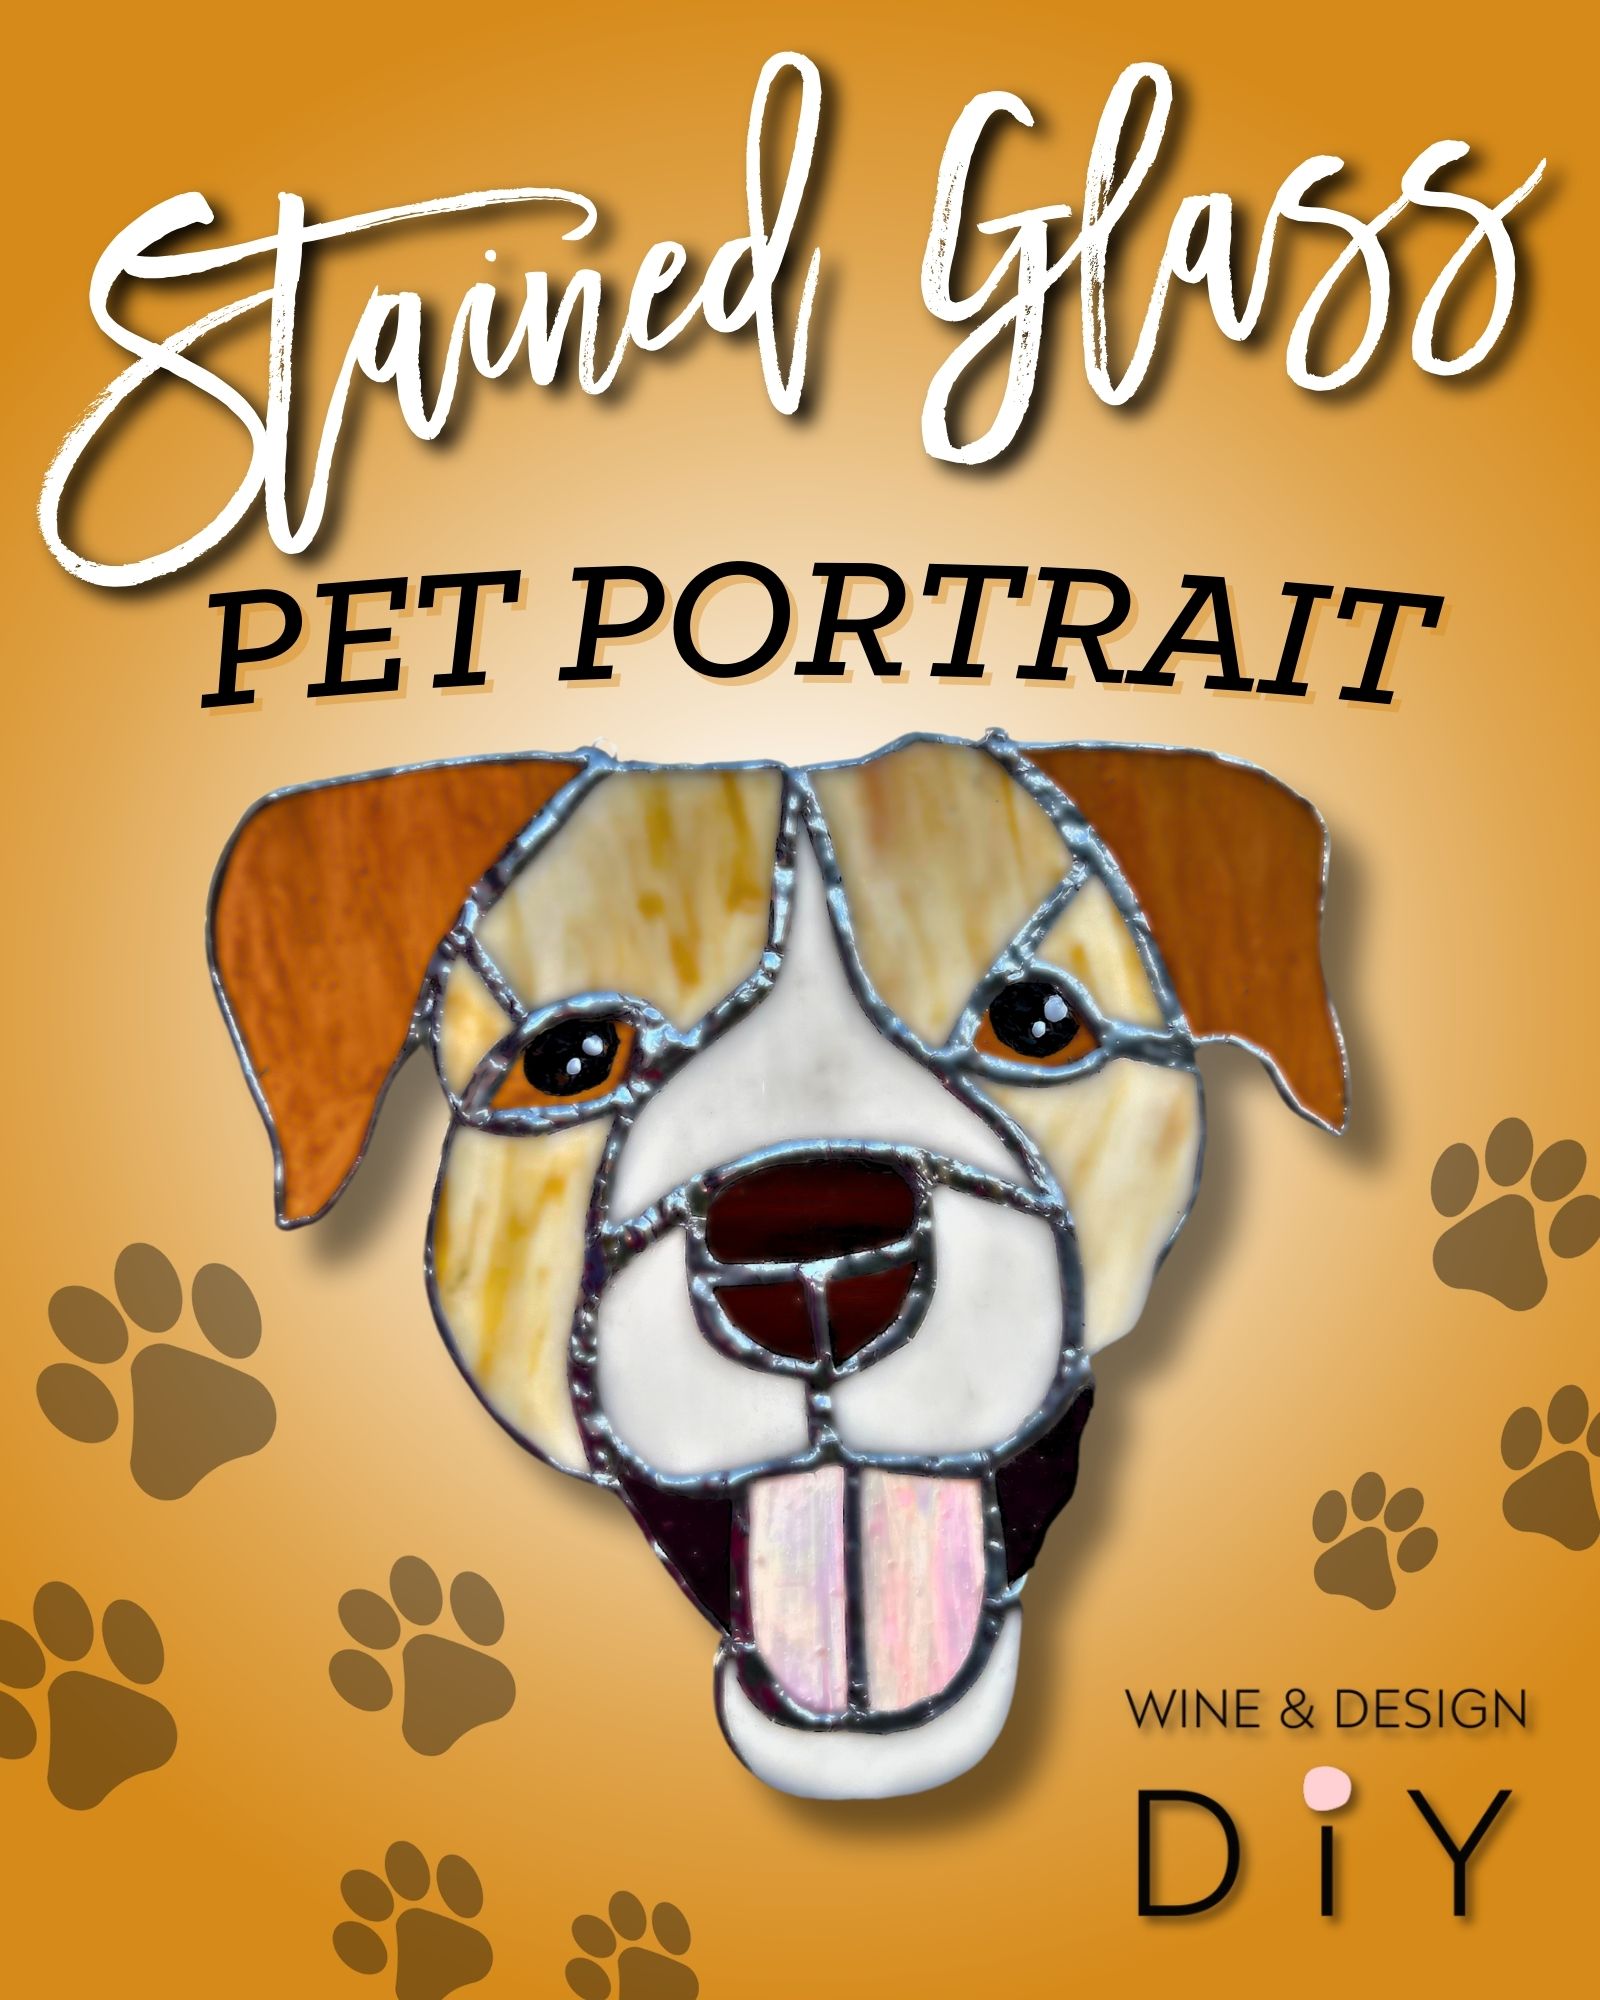 Stained Glass Pet Portrait